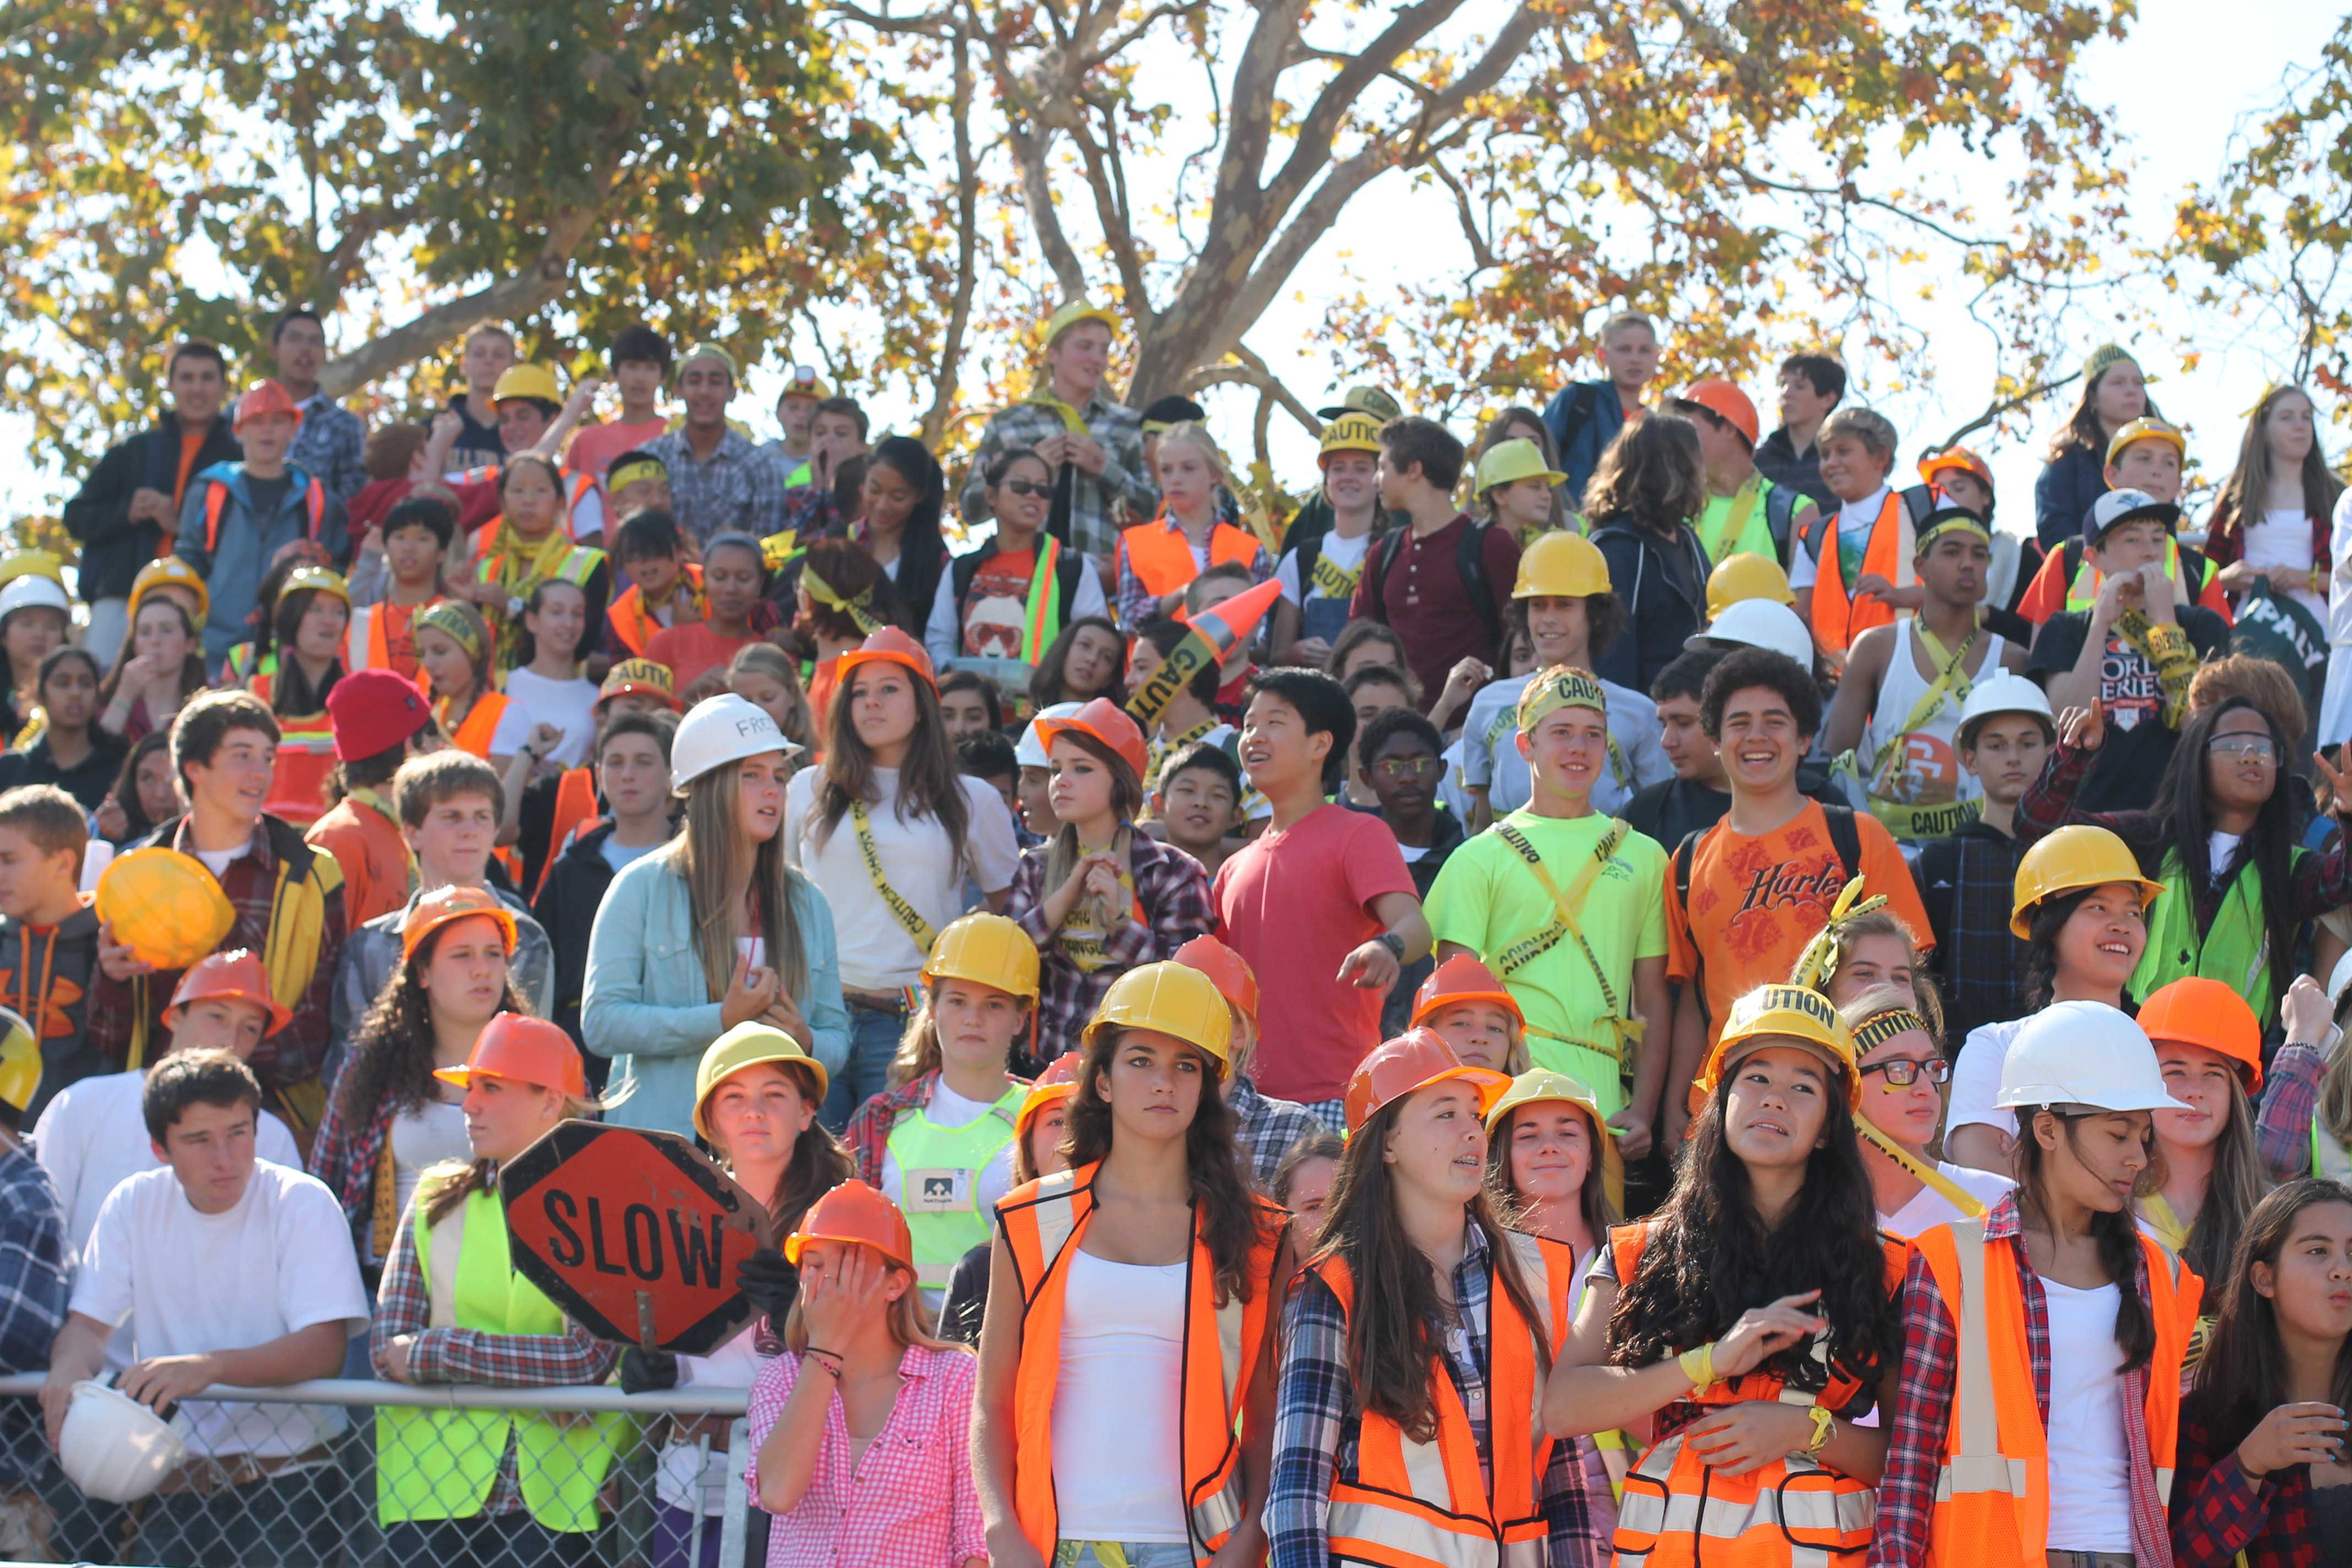 Freshmen dress according to their theme "Warning/Under Construction" during Spirit Week 2013. Photo by Molly Fogarty and Cathy Rong.